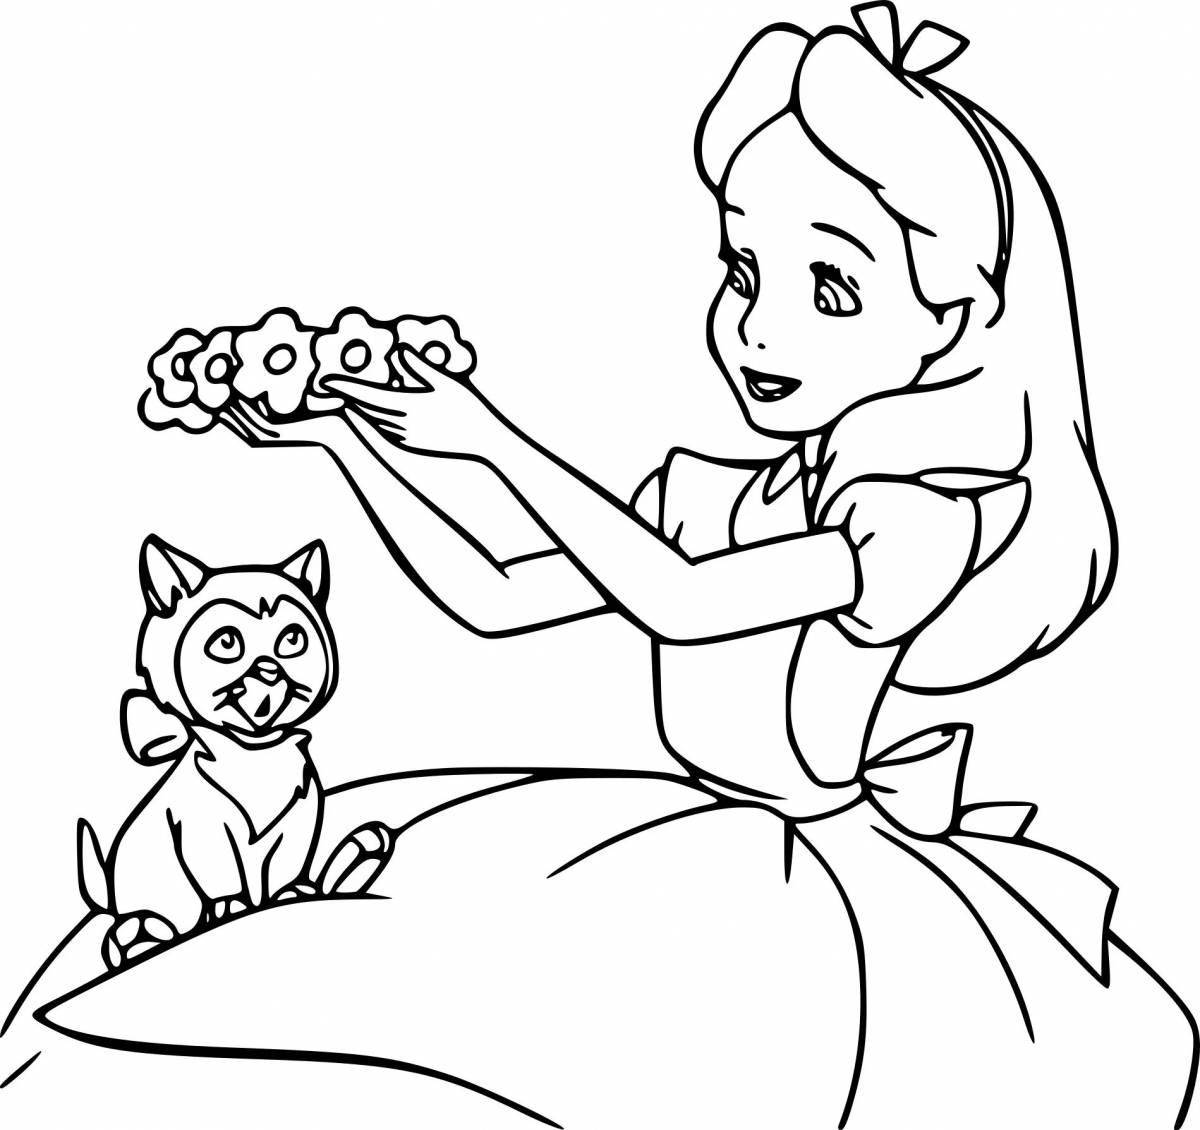 Colorful mystery alice coloring page for boys